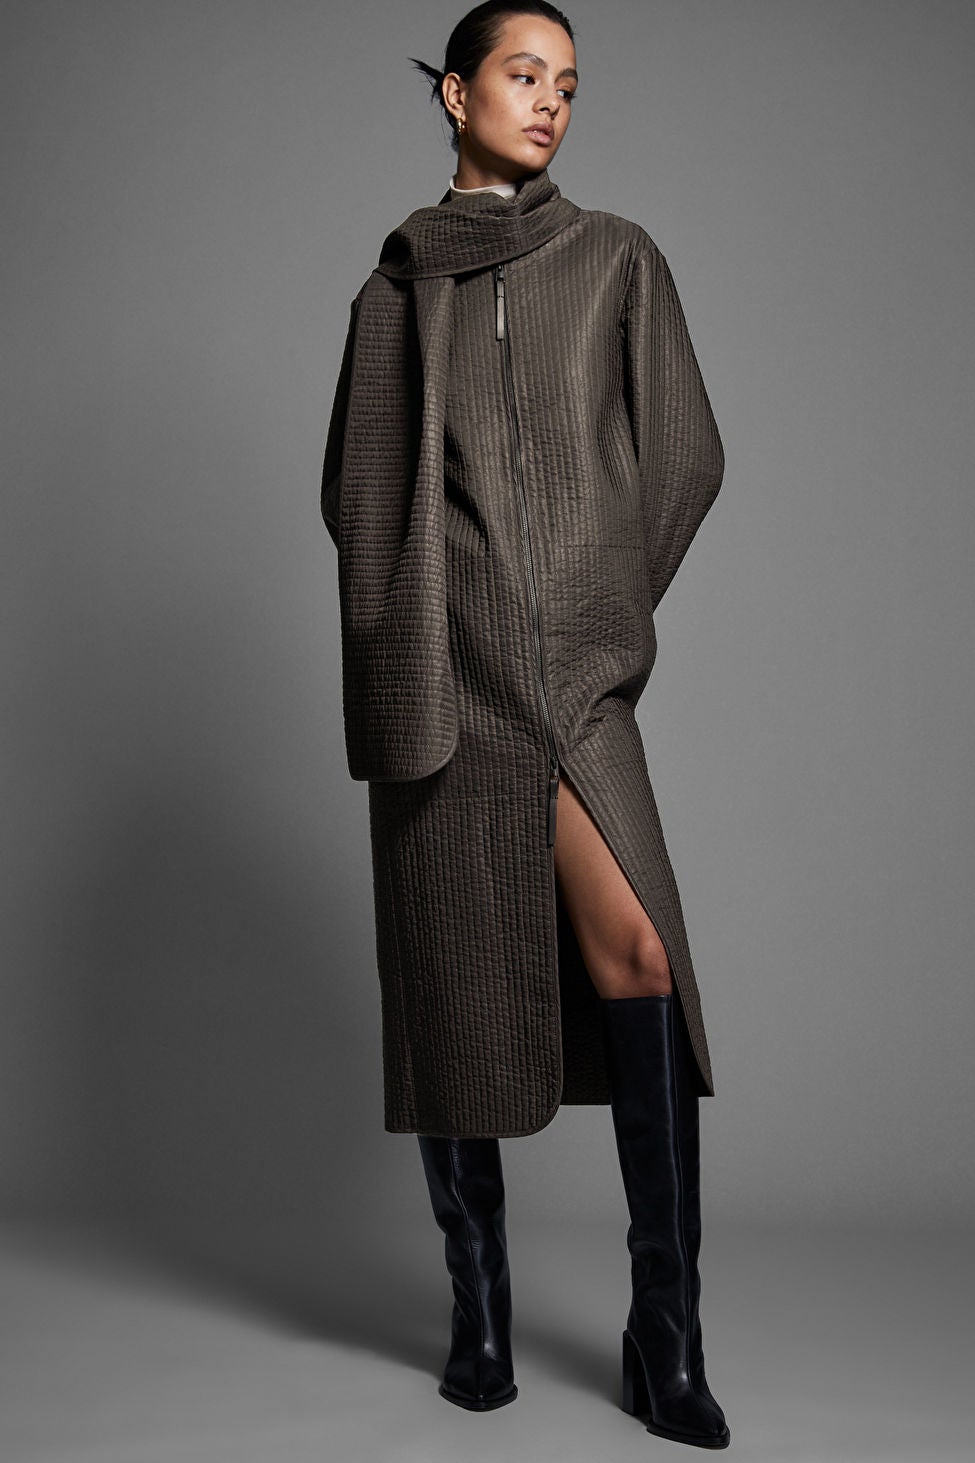 COS + THE PADDED LINER COAT